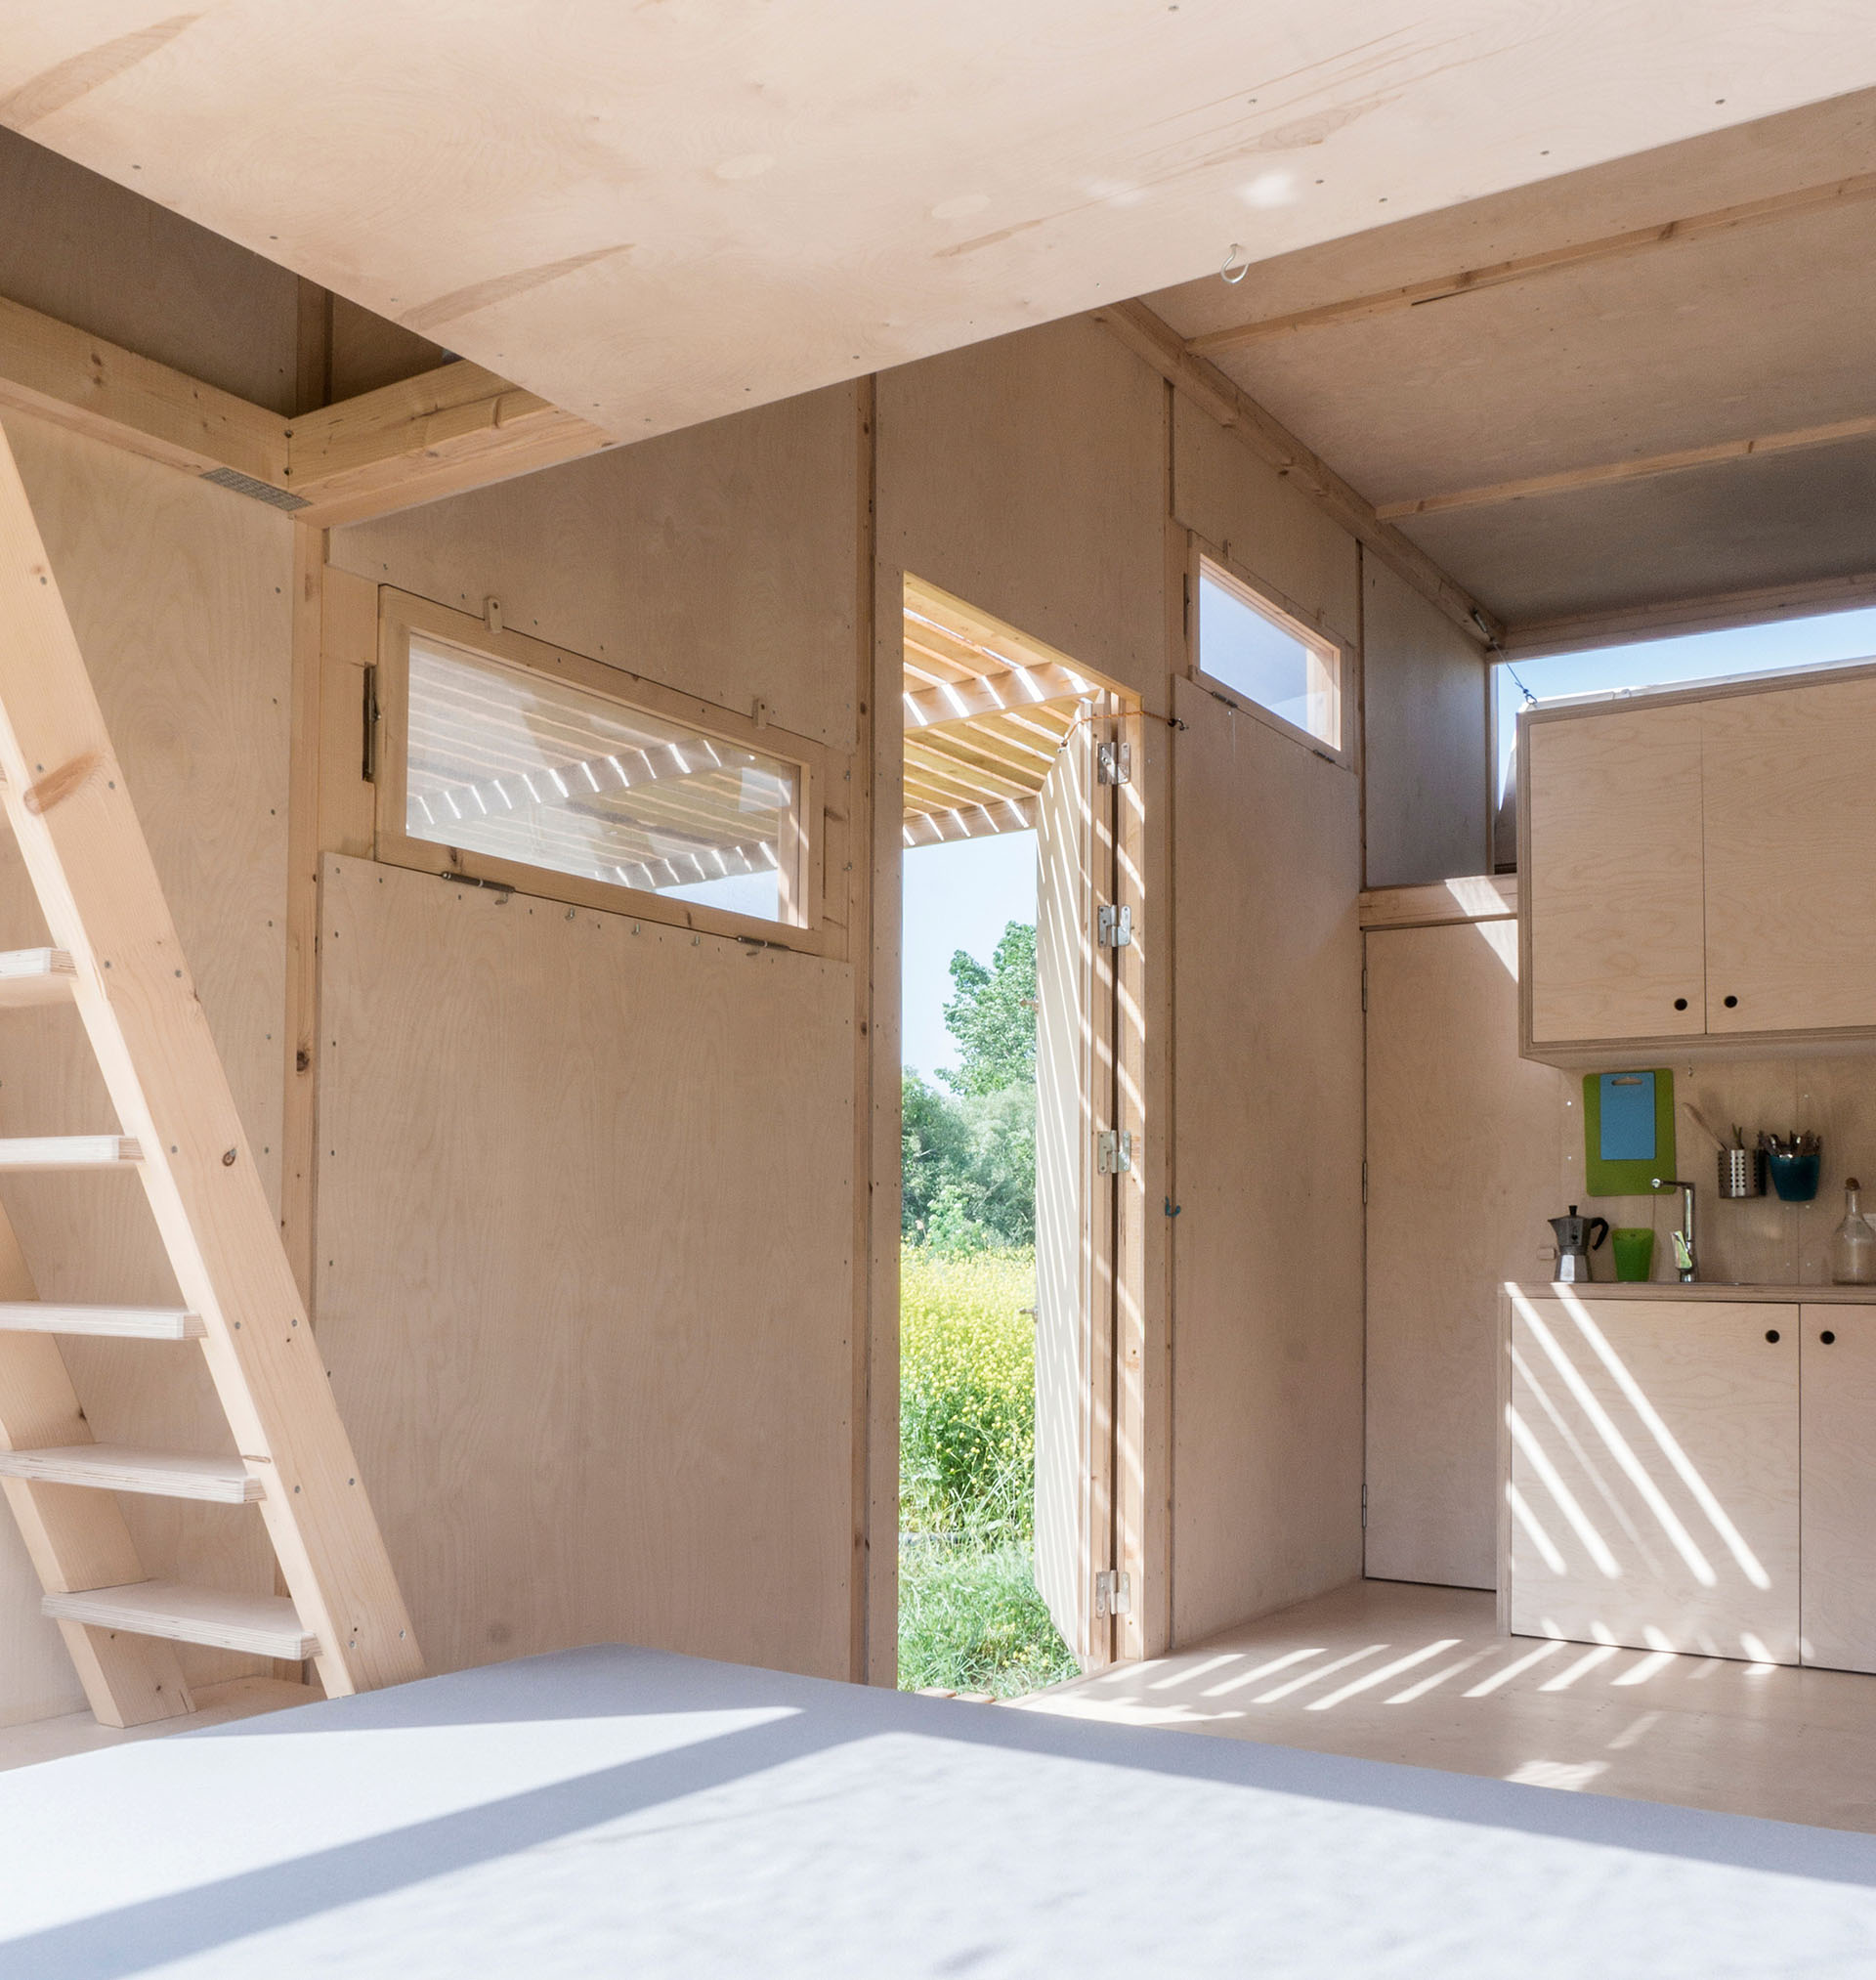 <p>Interior. Cabin on the Border is a tiny, transportable, prefabricated and affordable off-grid living unit for 4-6 people. It is located in a village near the border of Turkey and Greece.</p>